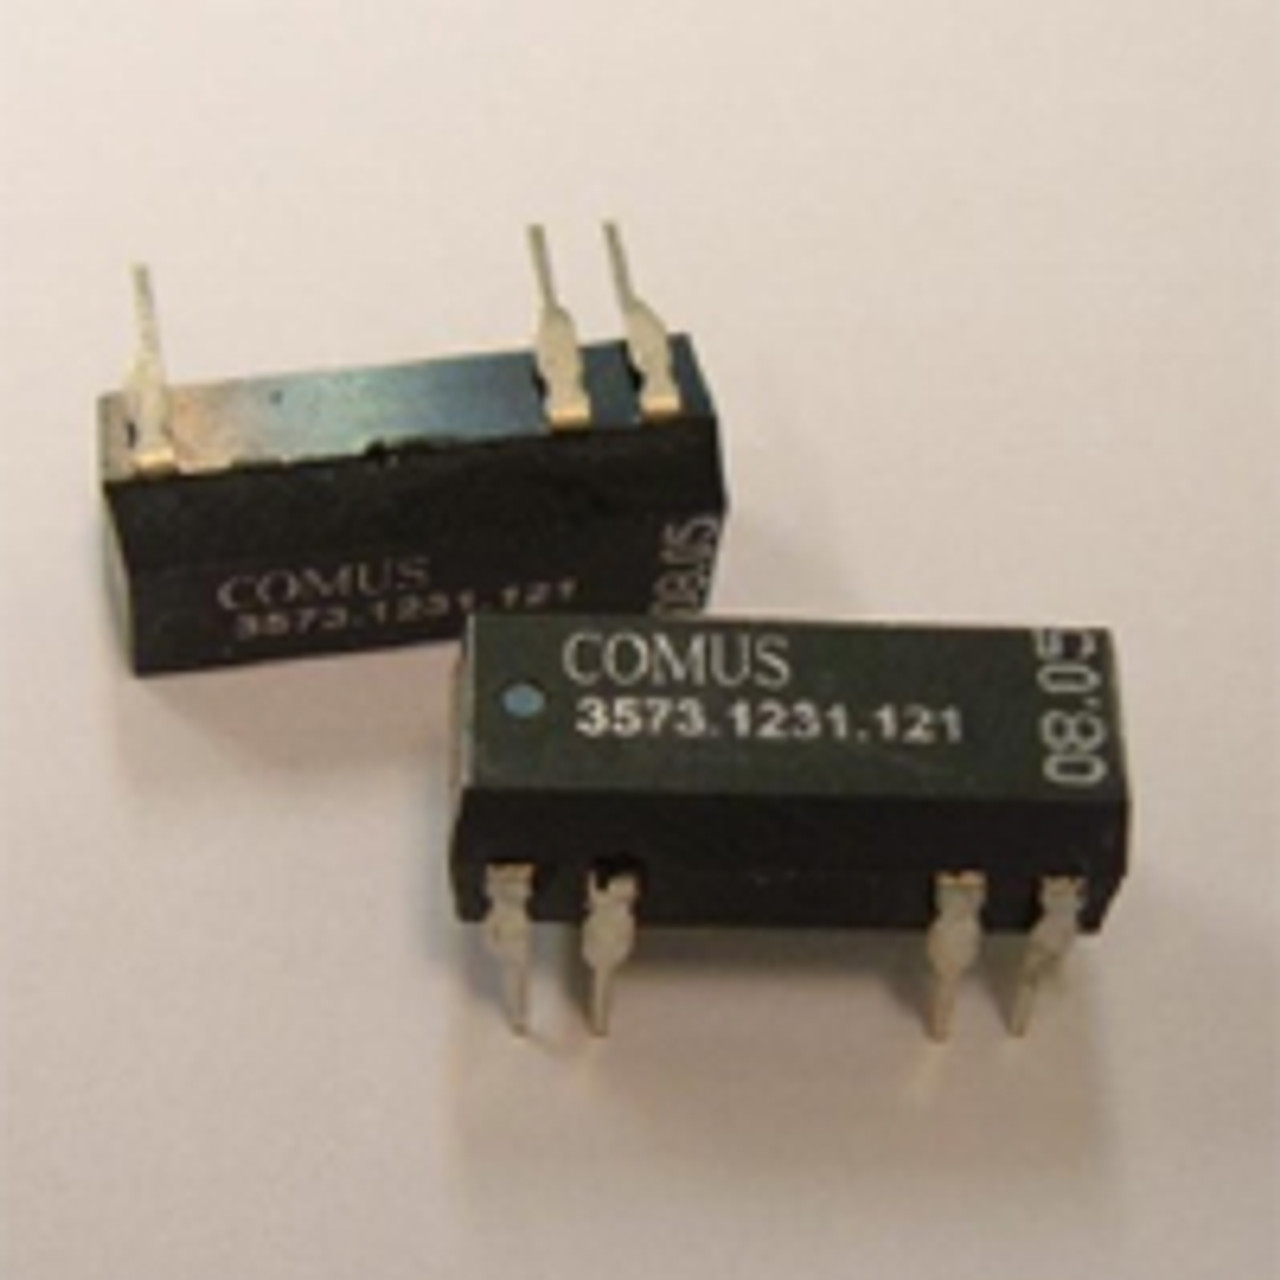 Comus 3565-1231-123 Reed Relays